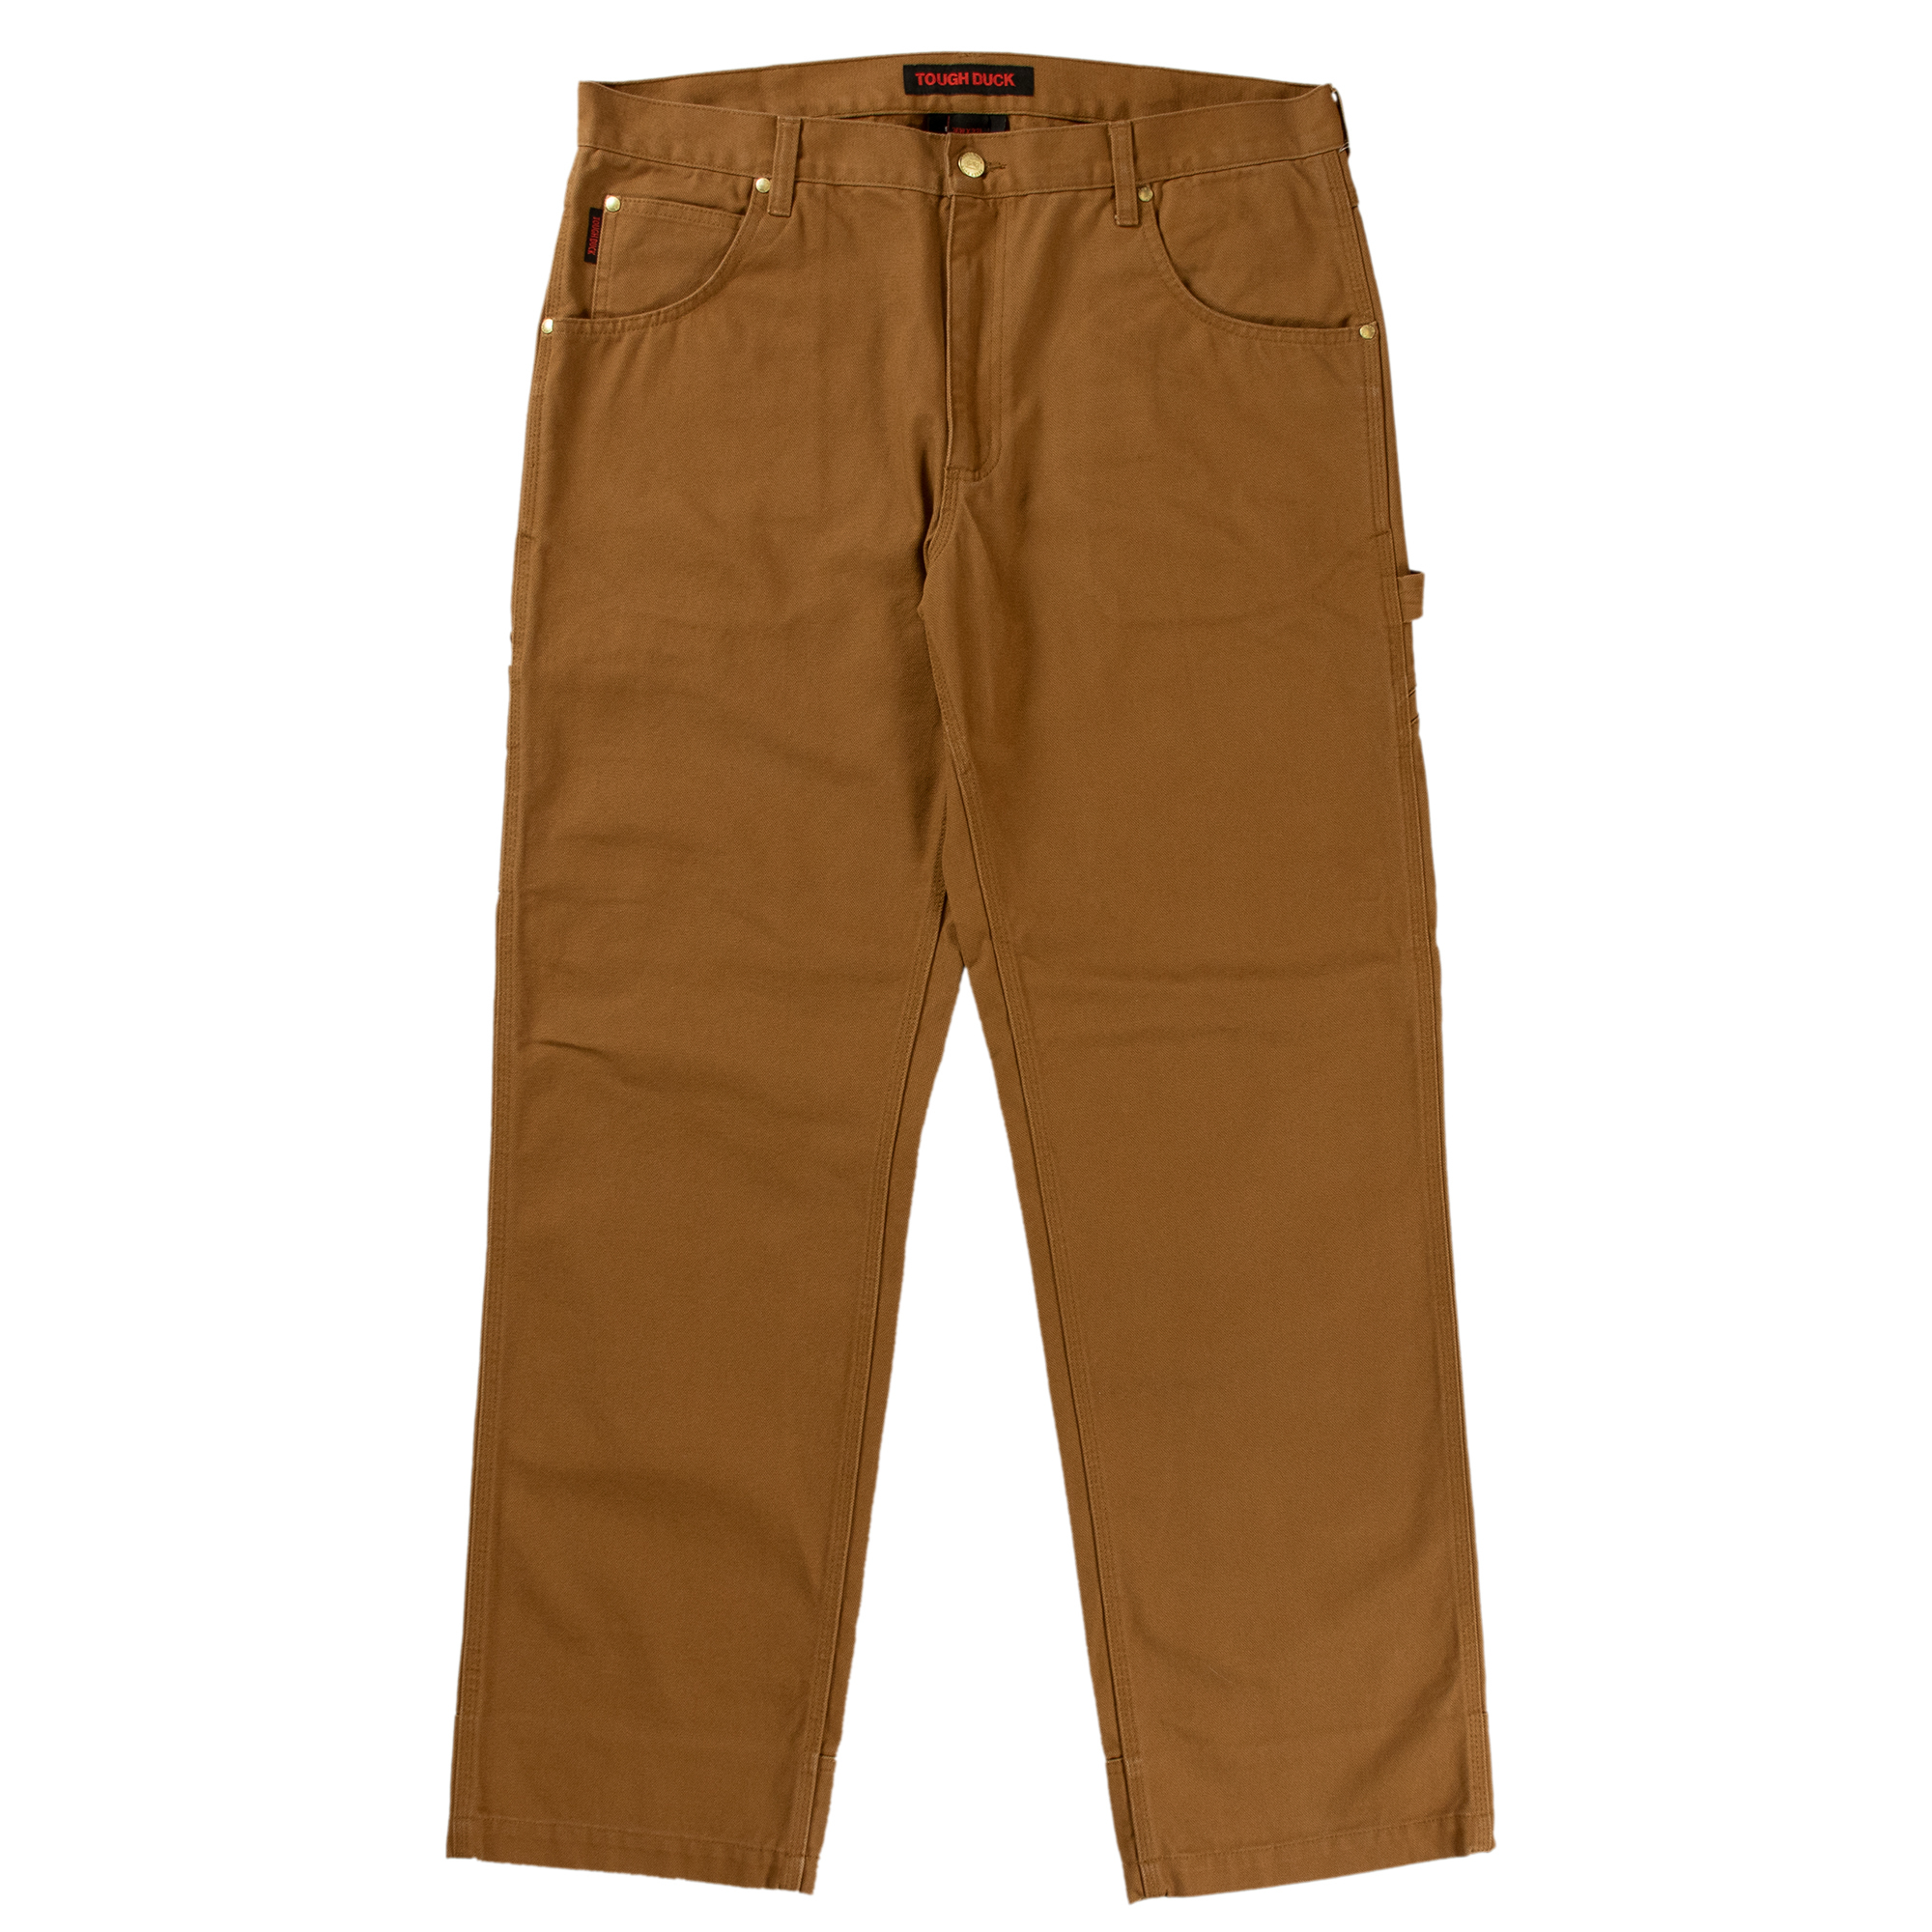 Tough Duck, Washed Duck Pant, Waist 44 in, Inseam 34 in, Color Brown, Model WP023